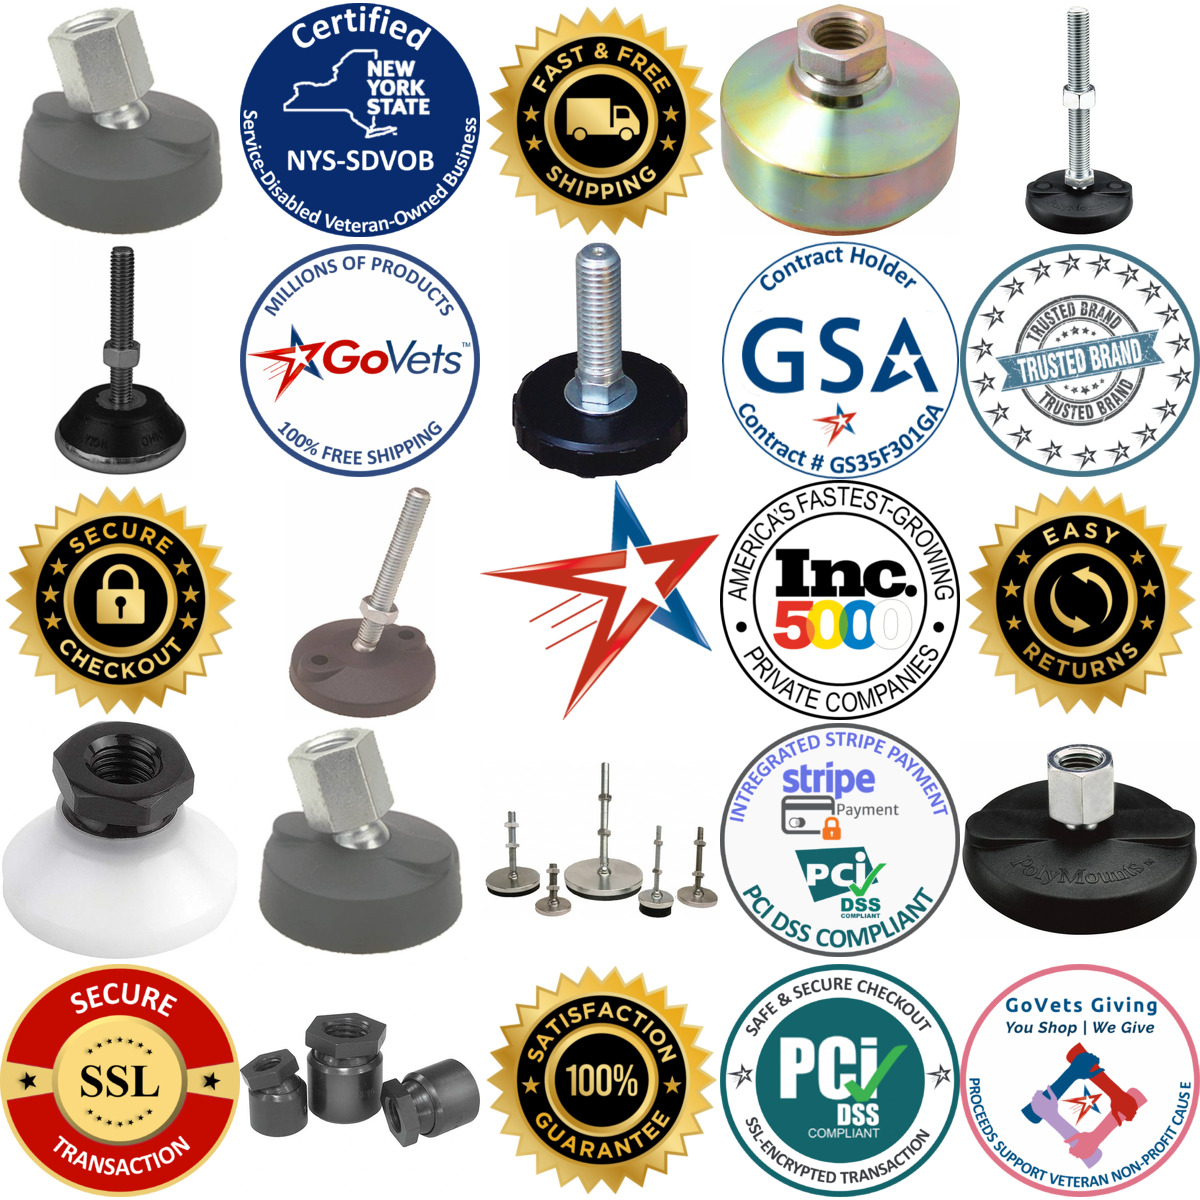 A selection of Socket Mount Leveling Pads and Mounts products on GoVets